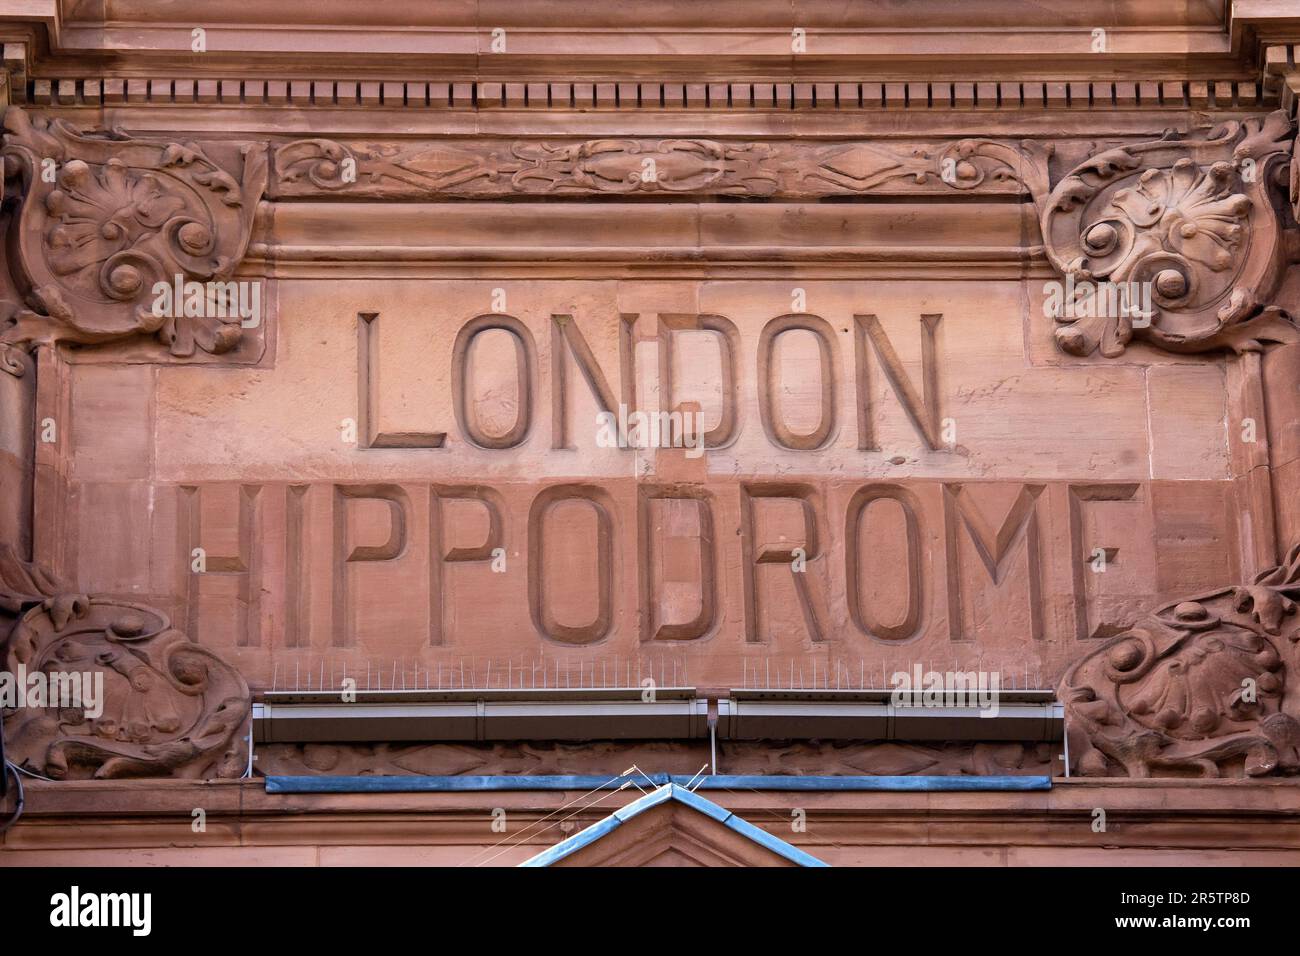 London, UK - April 20th 2023: The sign on the exterior of the London Hippodrome, located very near to Leicester Square in London, UK. Stock Photo